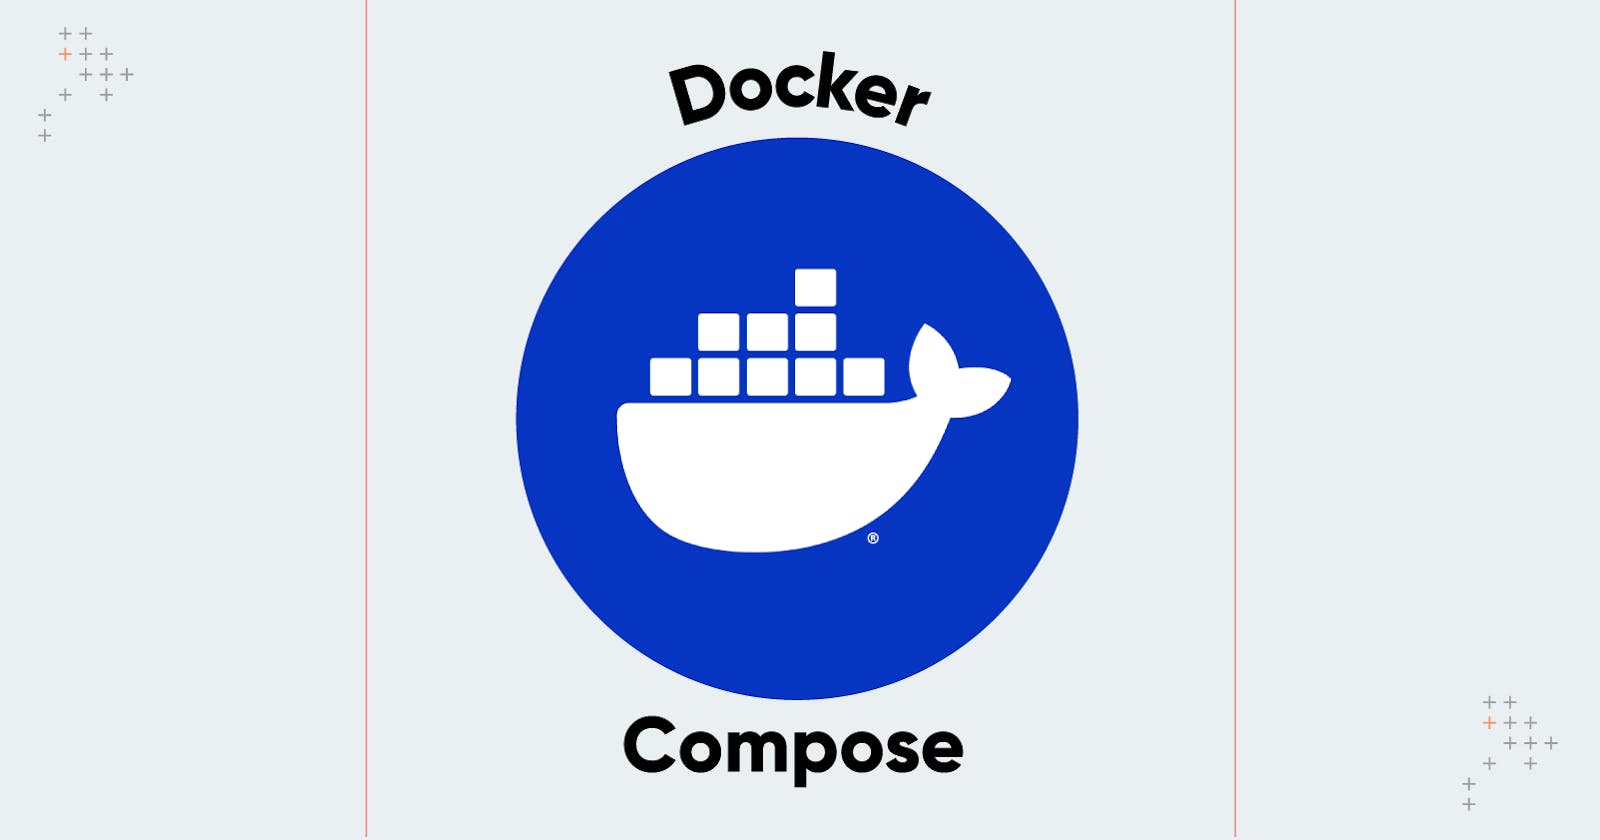 Dockerizing a project with Docker Compose